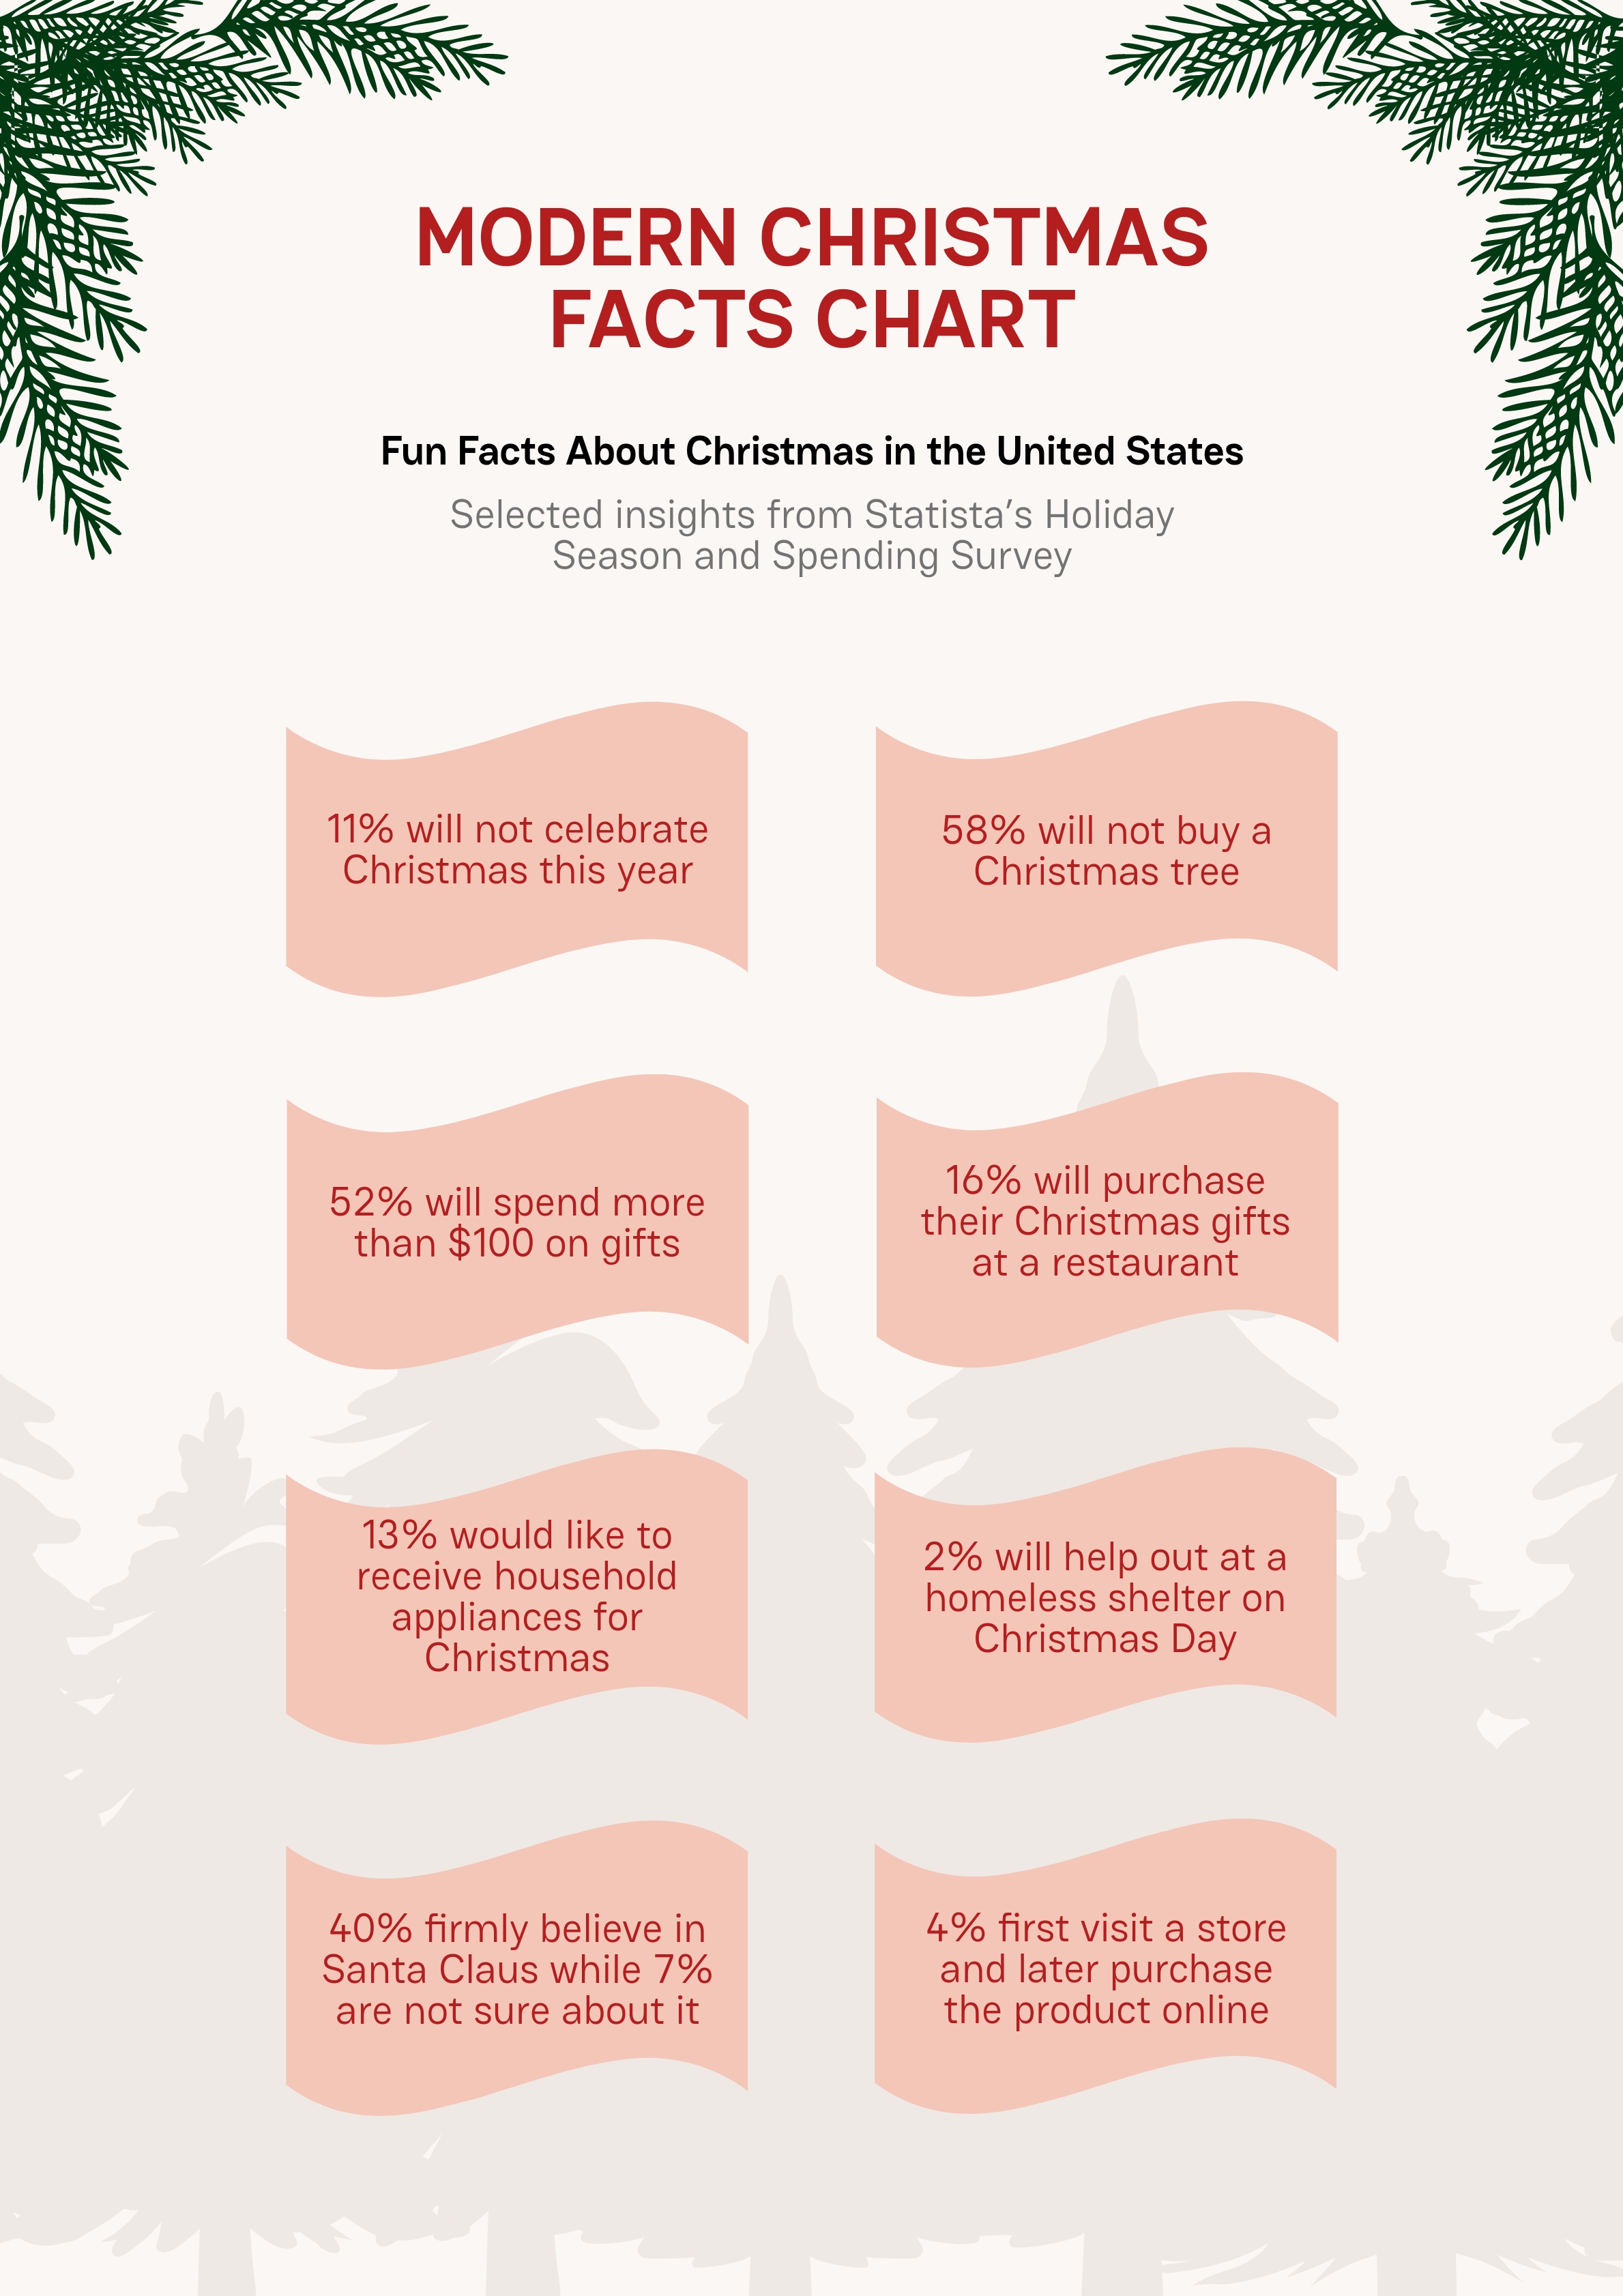 FREE Christmas Facts Chart Template Download in PDF, Illustrator